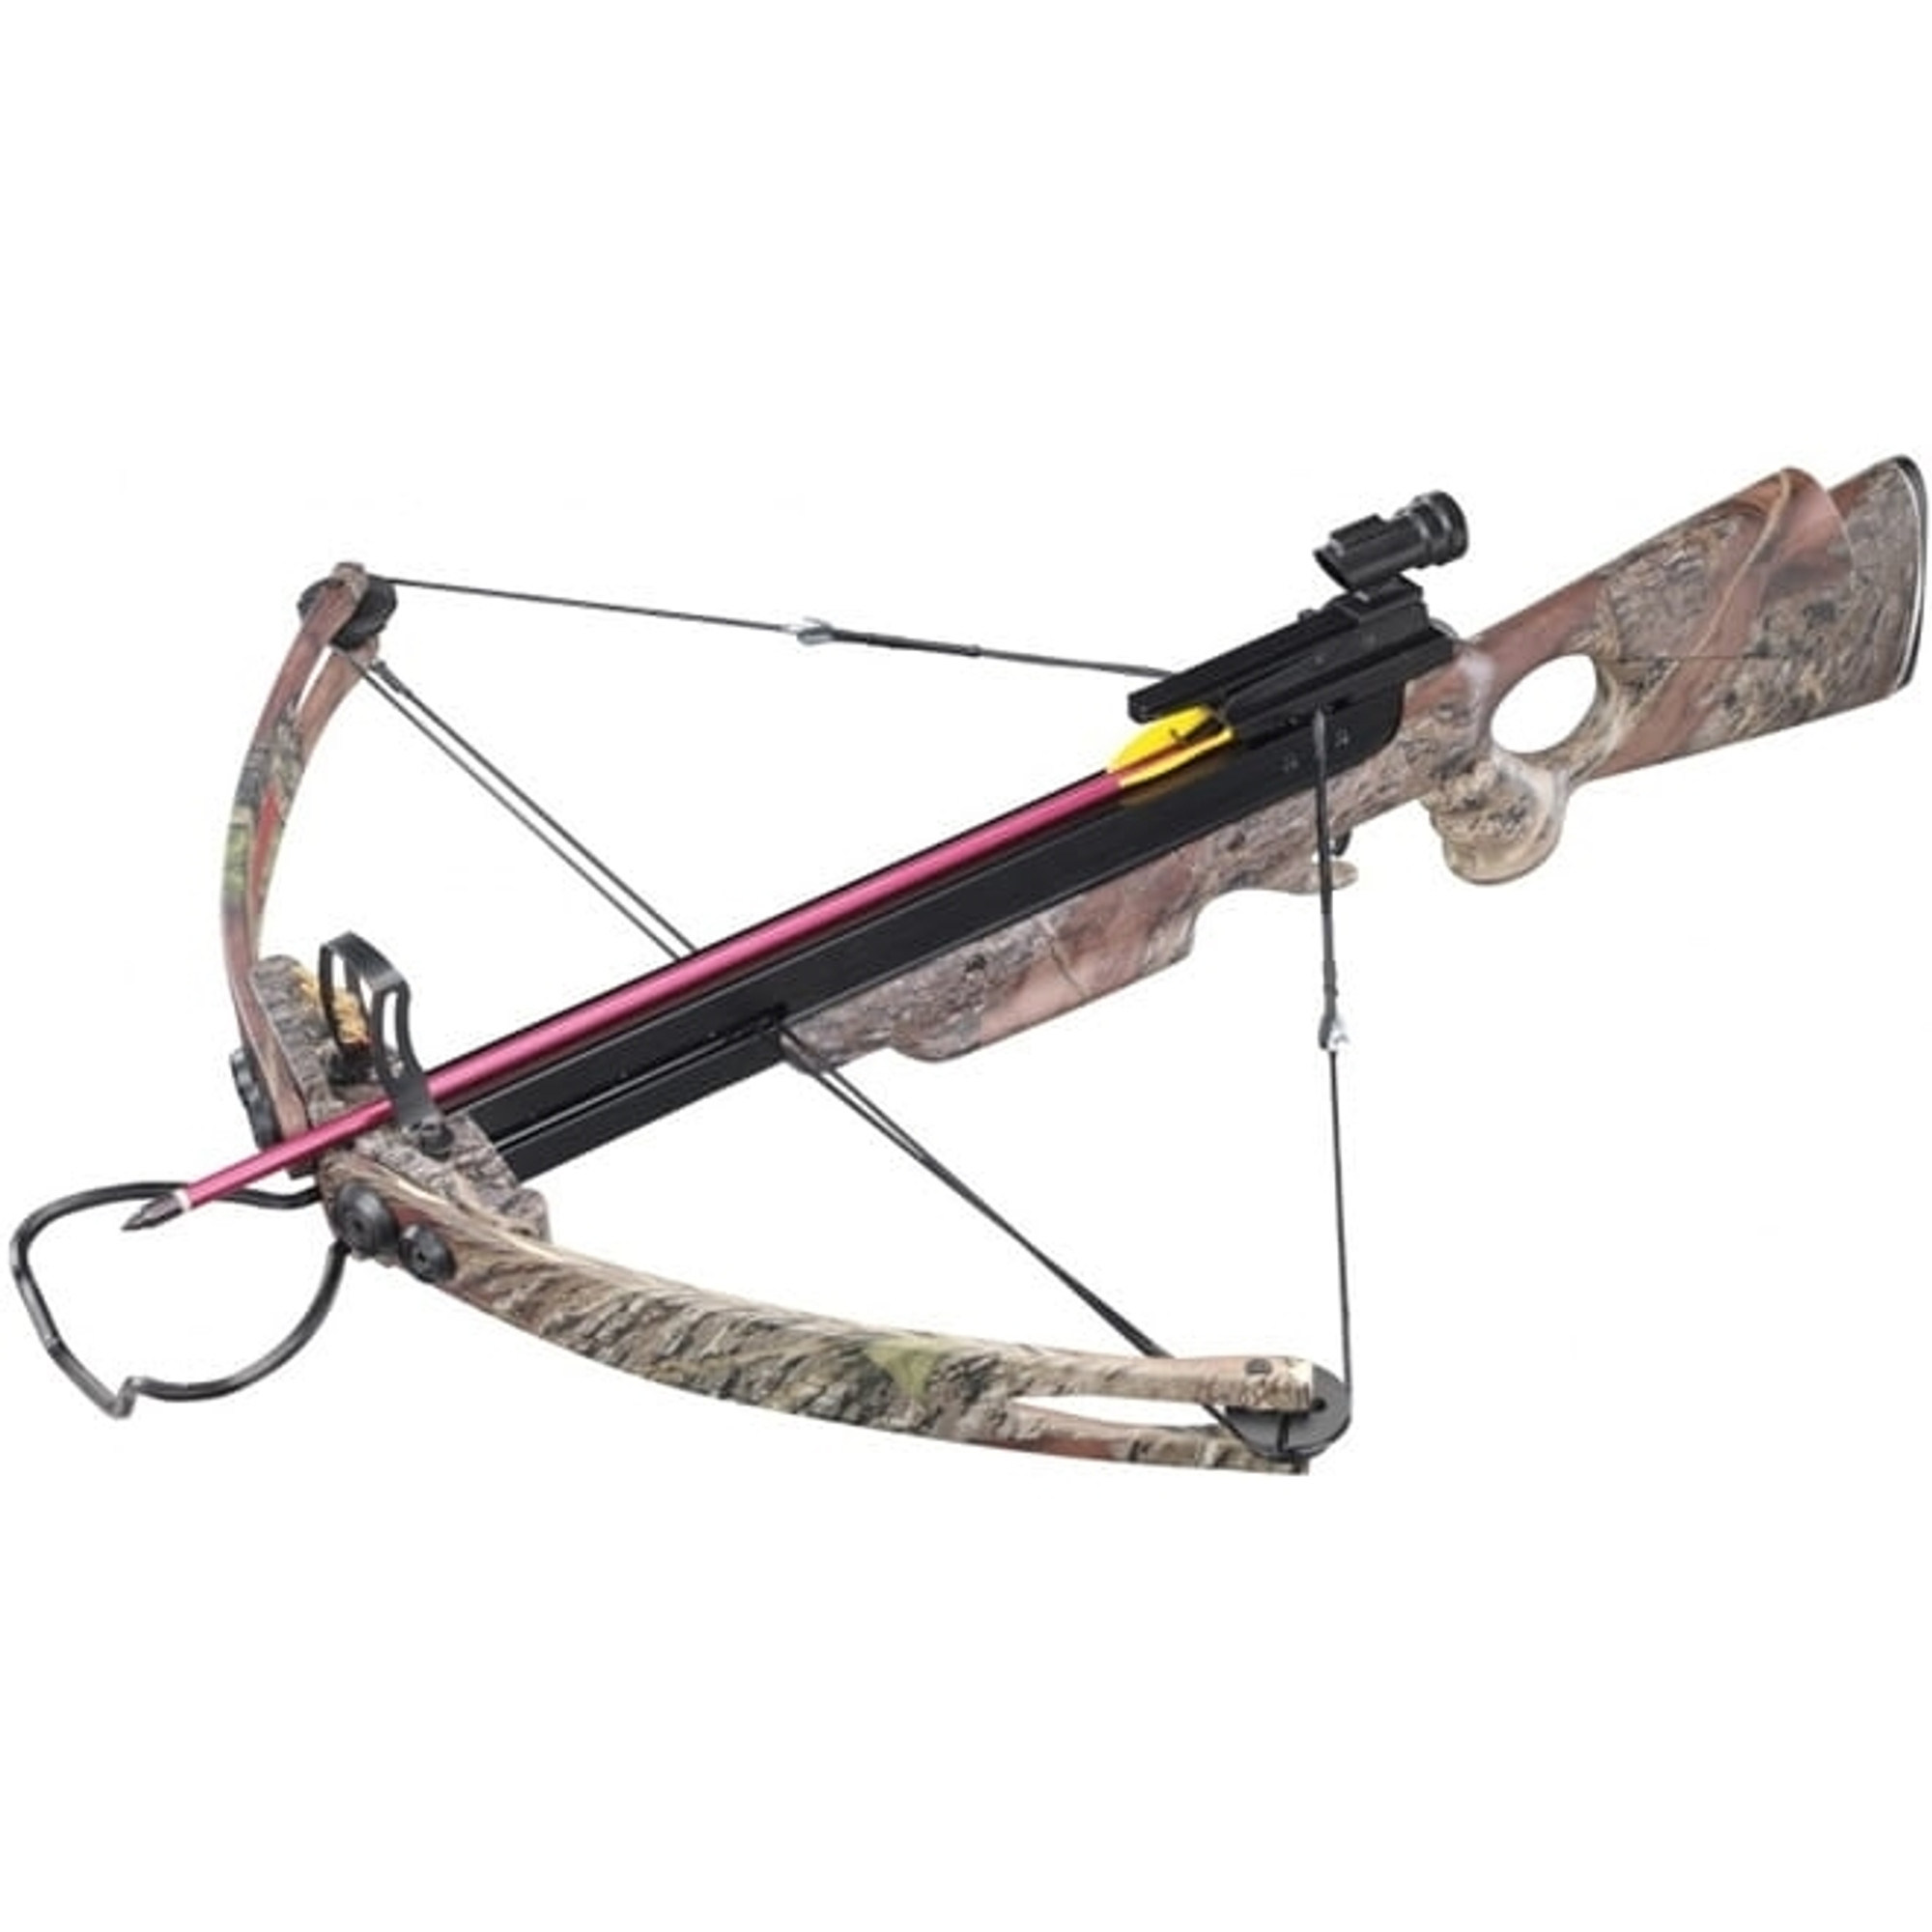 Man Kung Compound Crossbow Kit